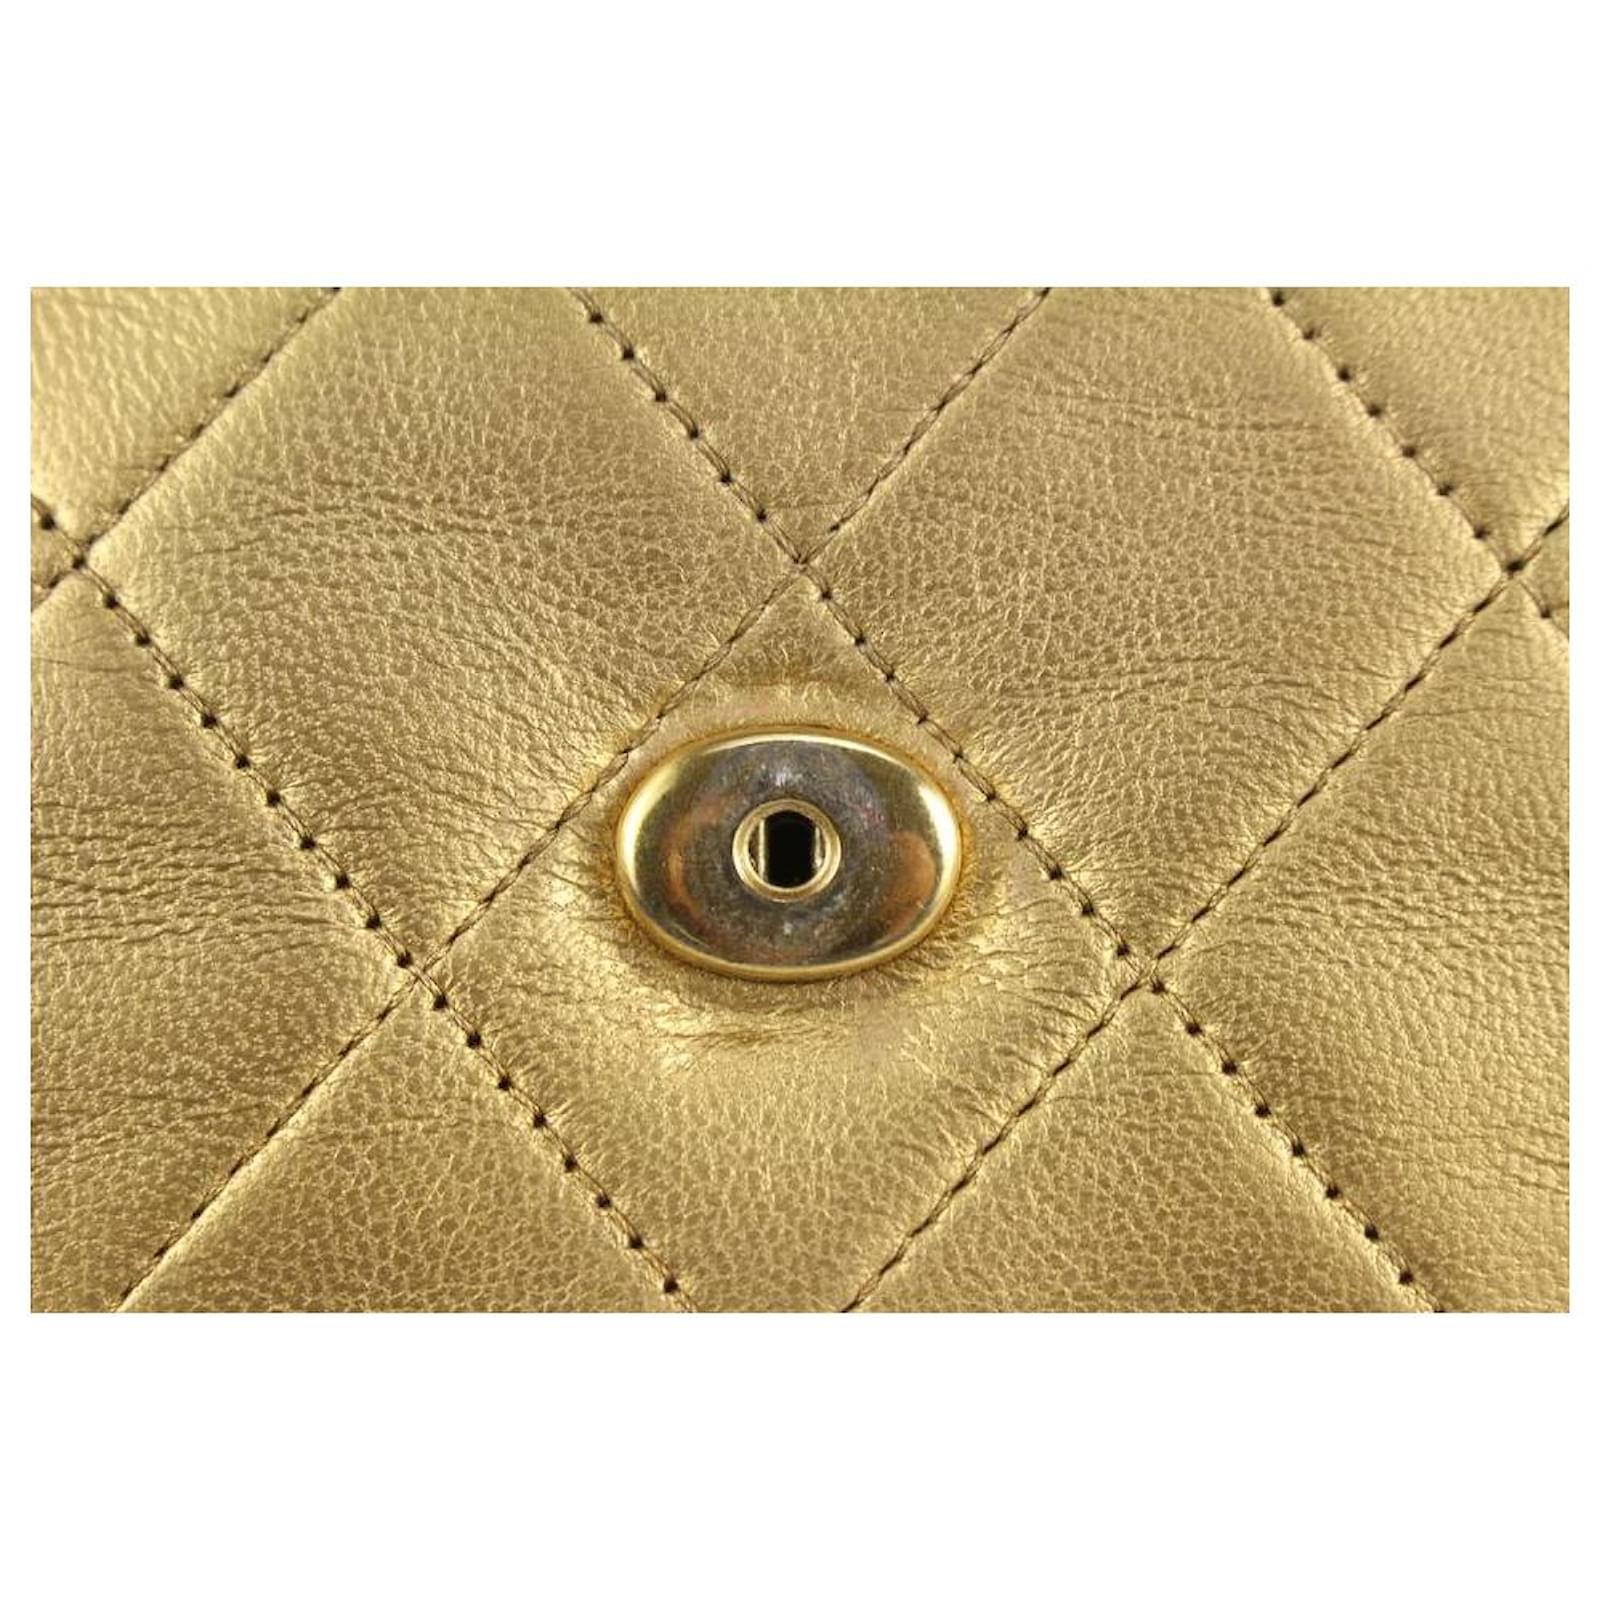 gold chanel pouch